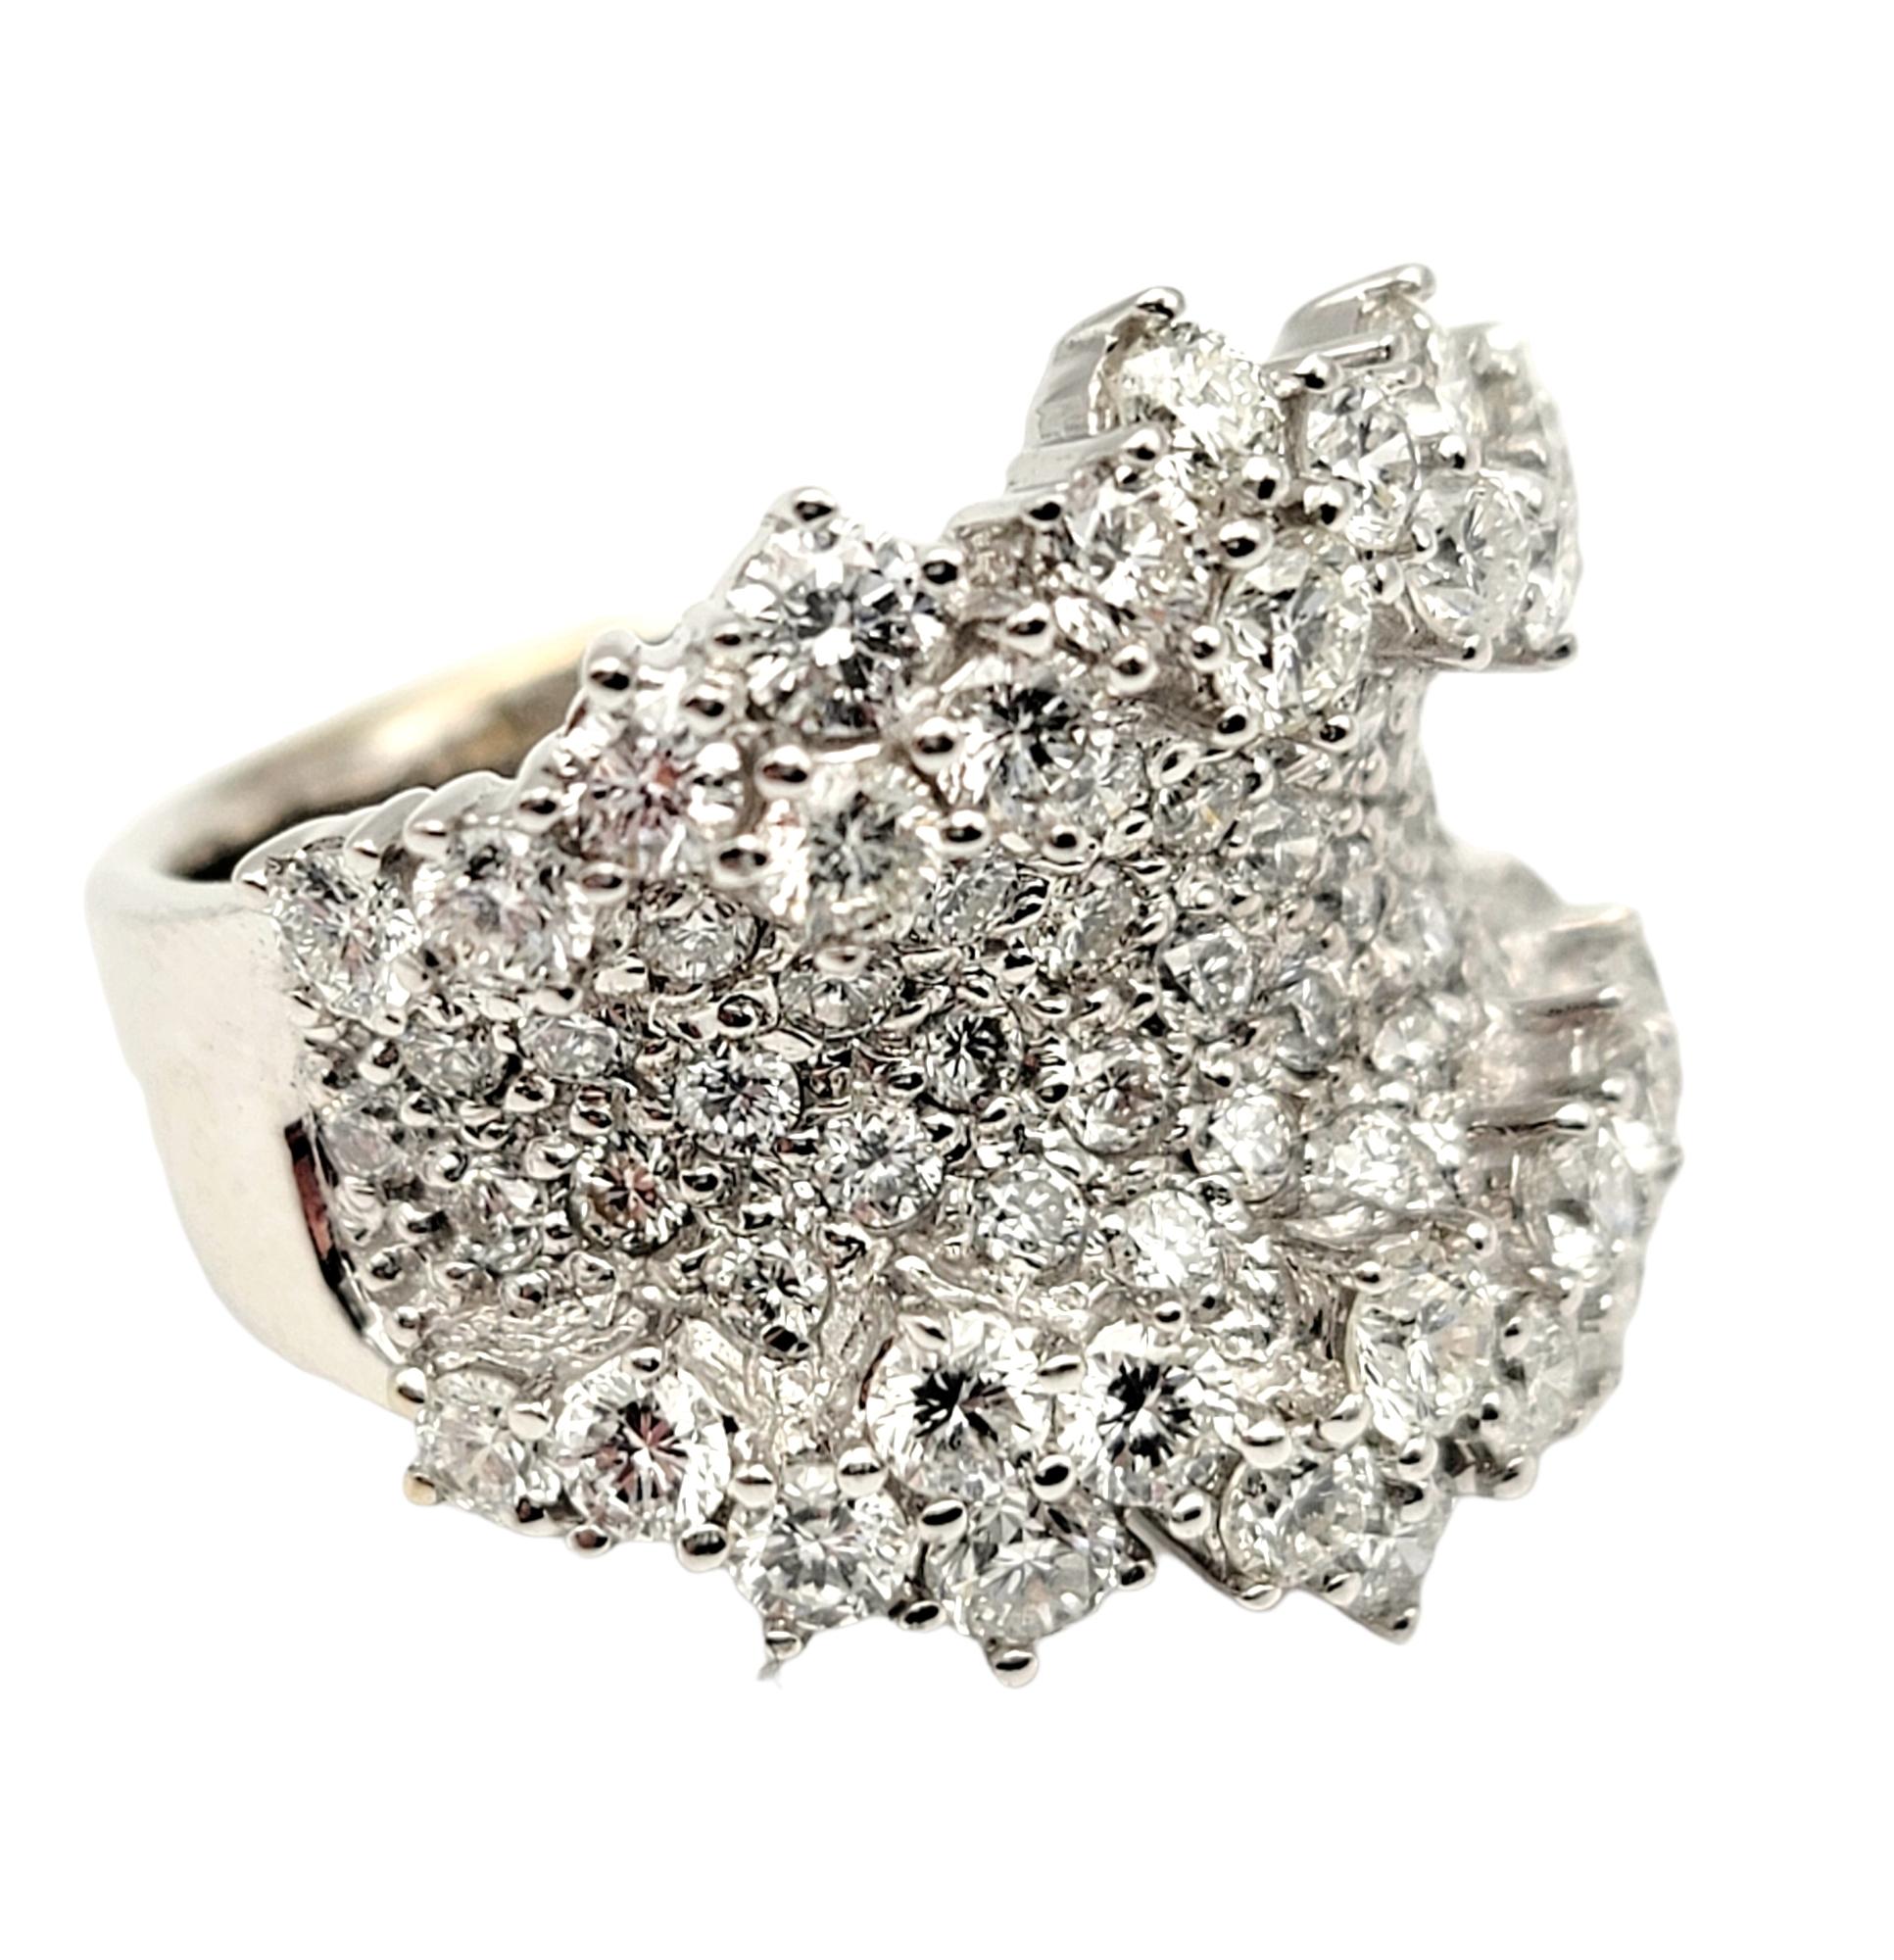 Ring size: 5

This glittering diamond ring is an absolute show stopper. Bright, icy white round diamonds shimmer and shine brilliantly throughout the entire piece, while the polished white gold enhances their white brilliance. The unique textured